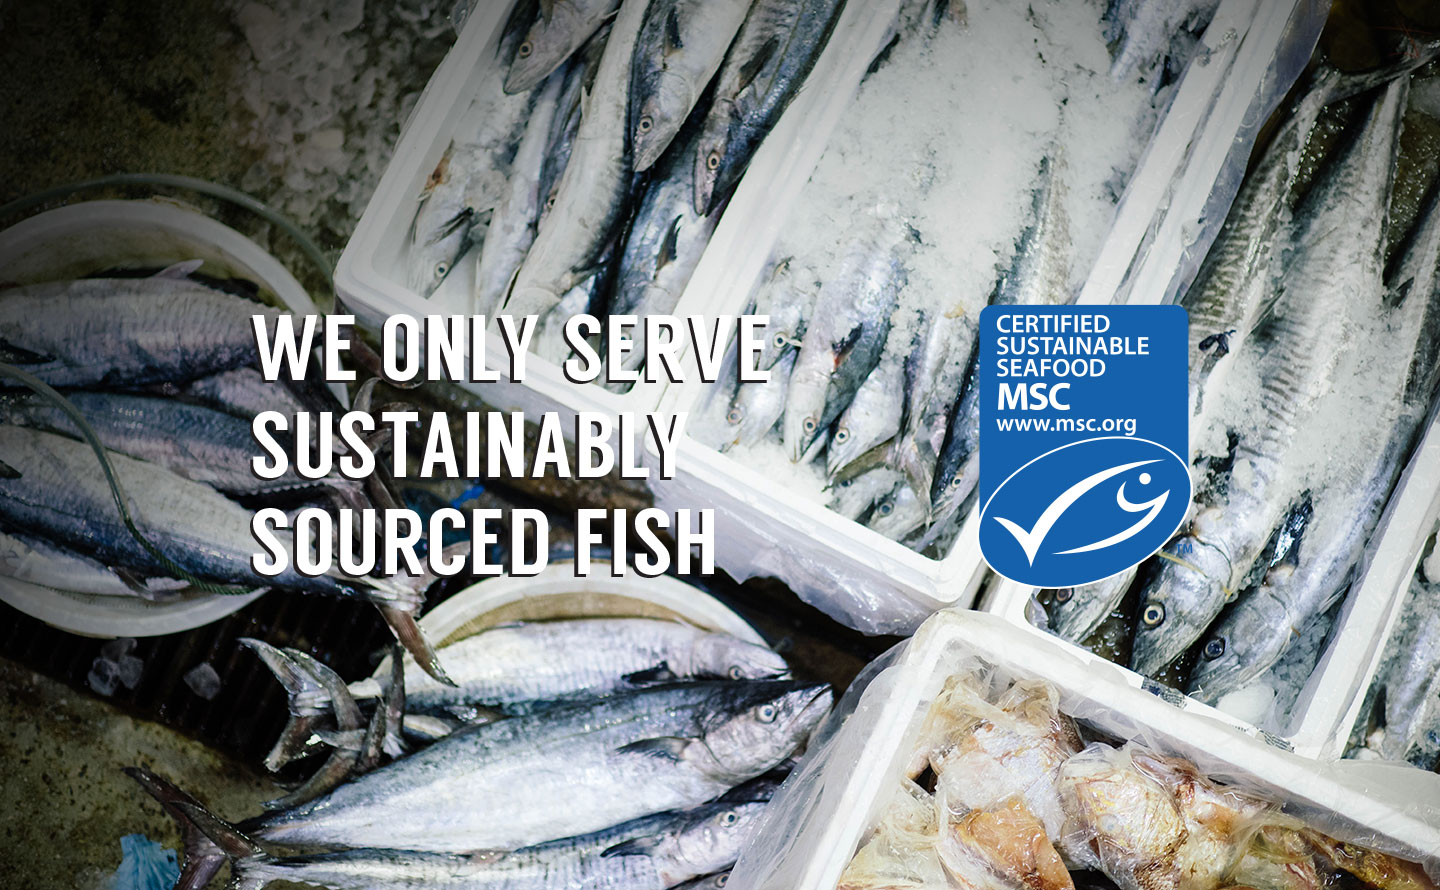 We Only Serve Sustainably Sourced Fish